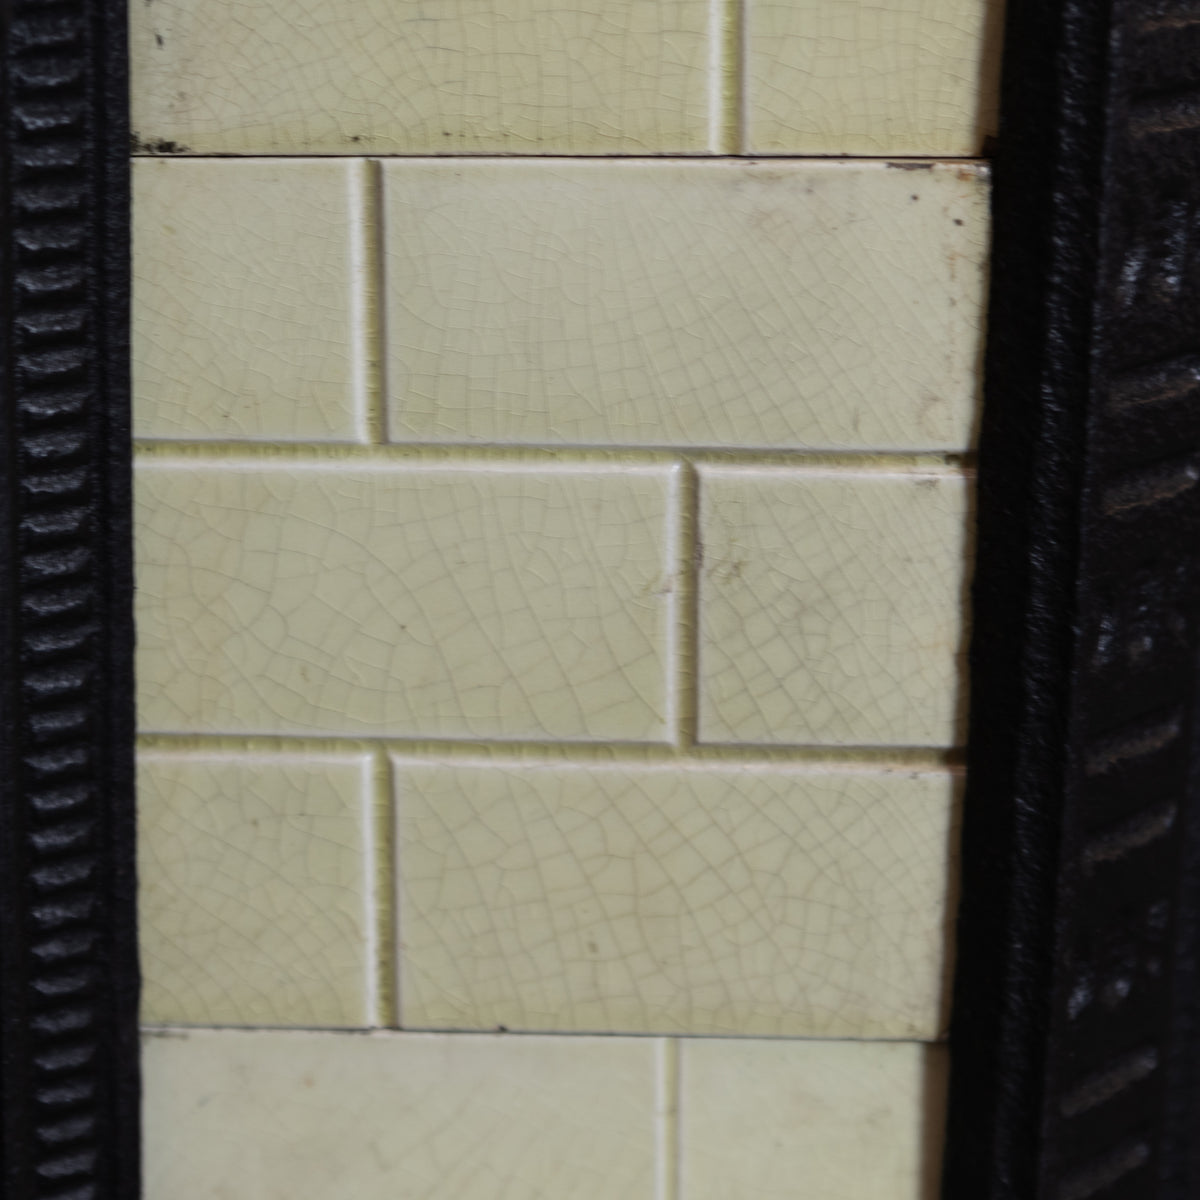 Antique Victorian Cast Iron Insert With Cream Tiles | The Architectural Forum